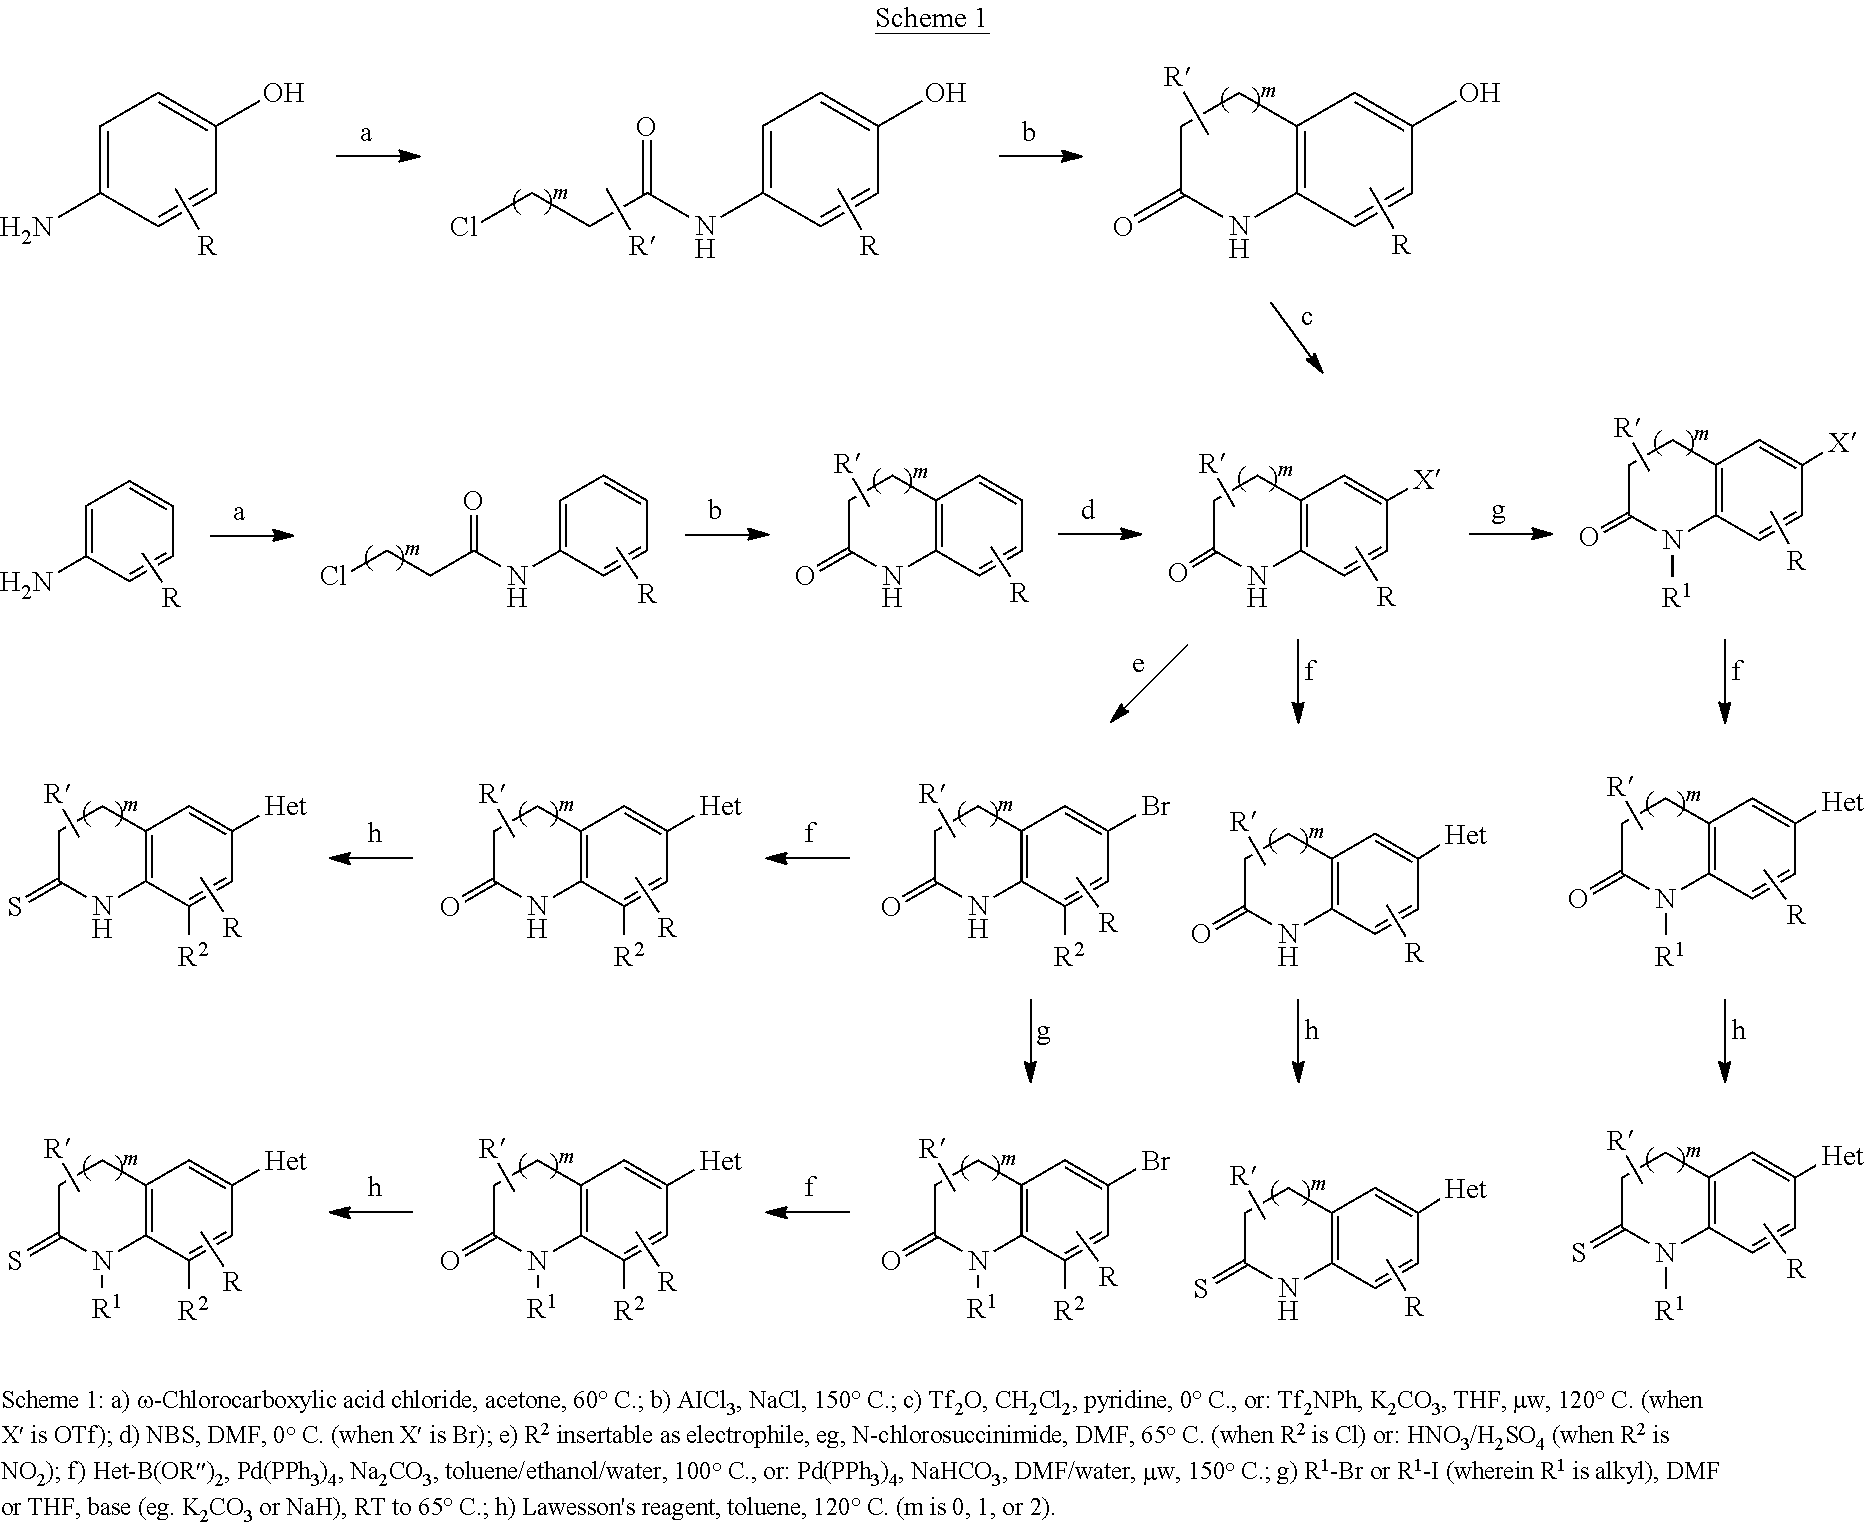 Inhibitors of the human aldosterone synthase CYP11B2